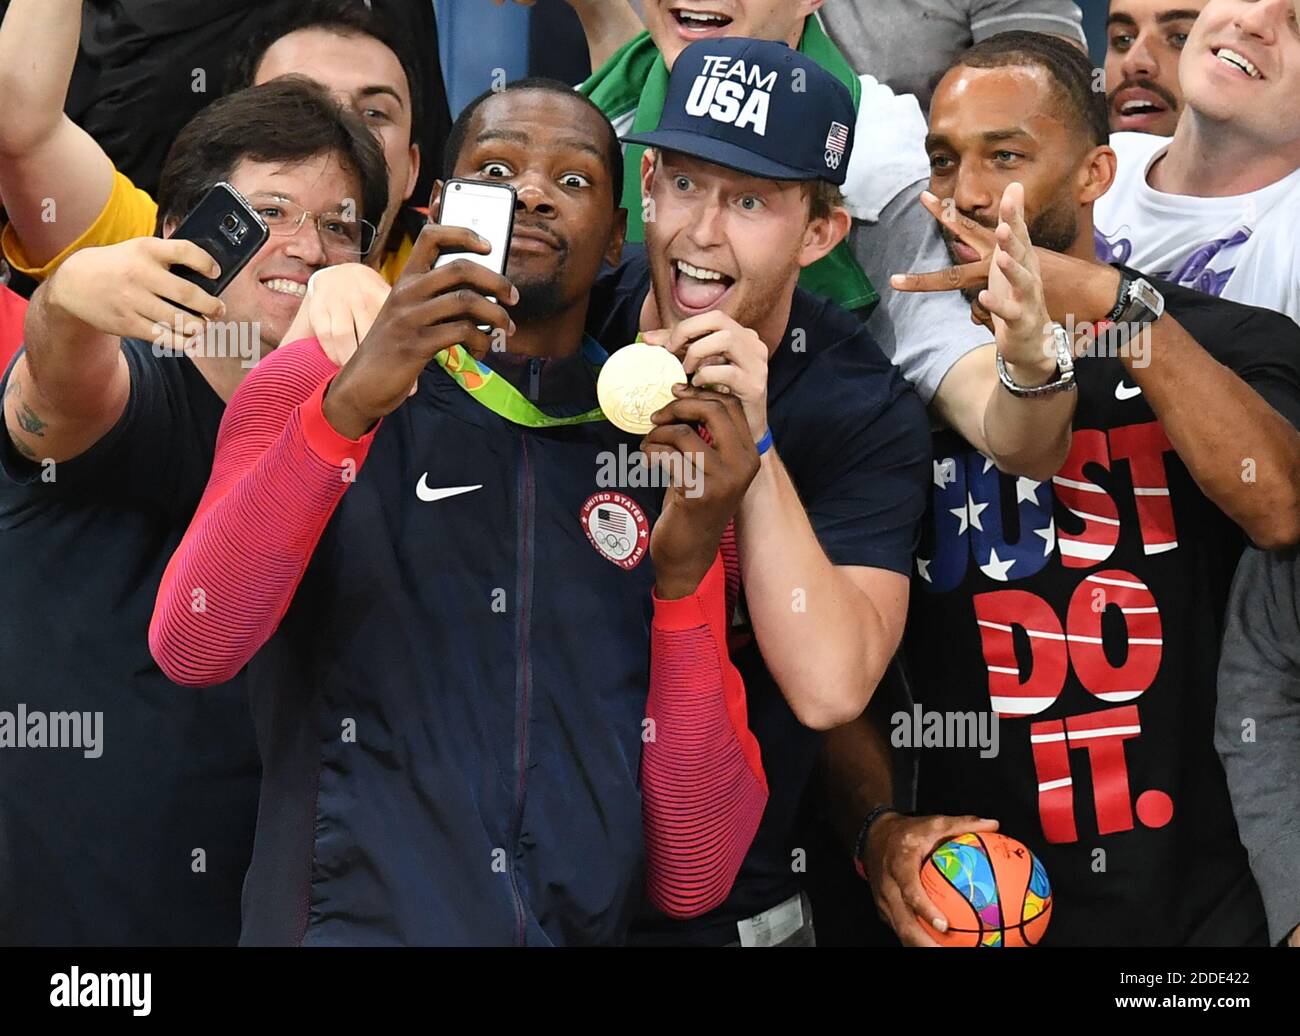 NO FILM, NO VIDEO, NO TV, NO DOCUMENTARY - Kevin Durant takes a selfie with fans after Team USA beat Serbia in the gold medal game on Sunday, August 21, 2016 at the Rio Olympic Games. Photo by Mark Reis/Colorado Springs Gazette/TNS/ABACAPRESS.COM Stock Photo